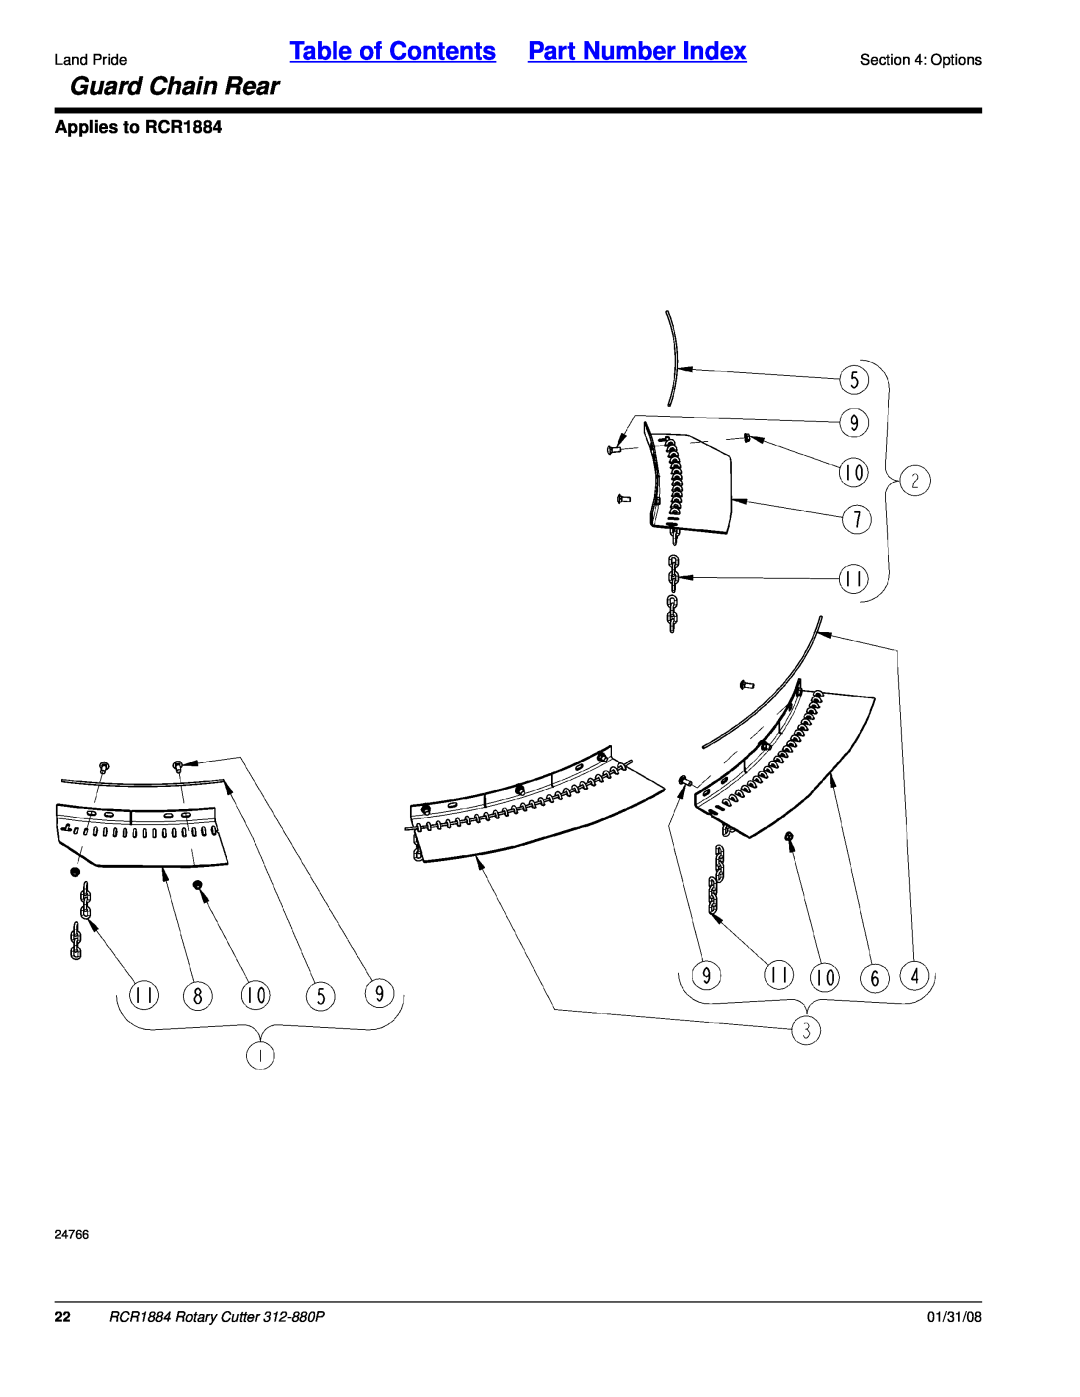 Land Pride Rotary Cutter manual Guard Chain Rear, Table of Contents Part Number Index, Applies to RCR1884, 01/31/08 